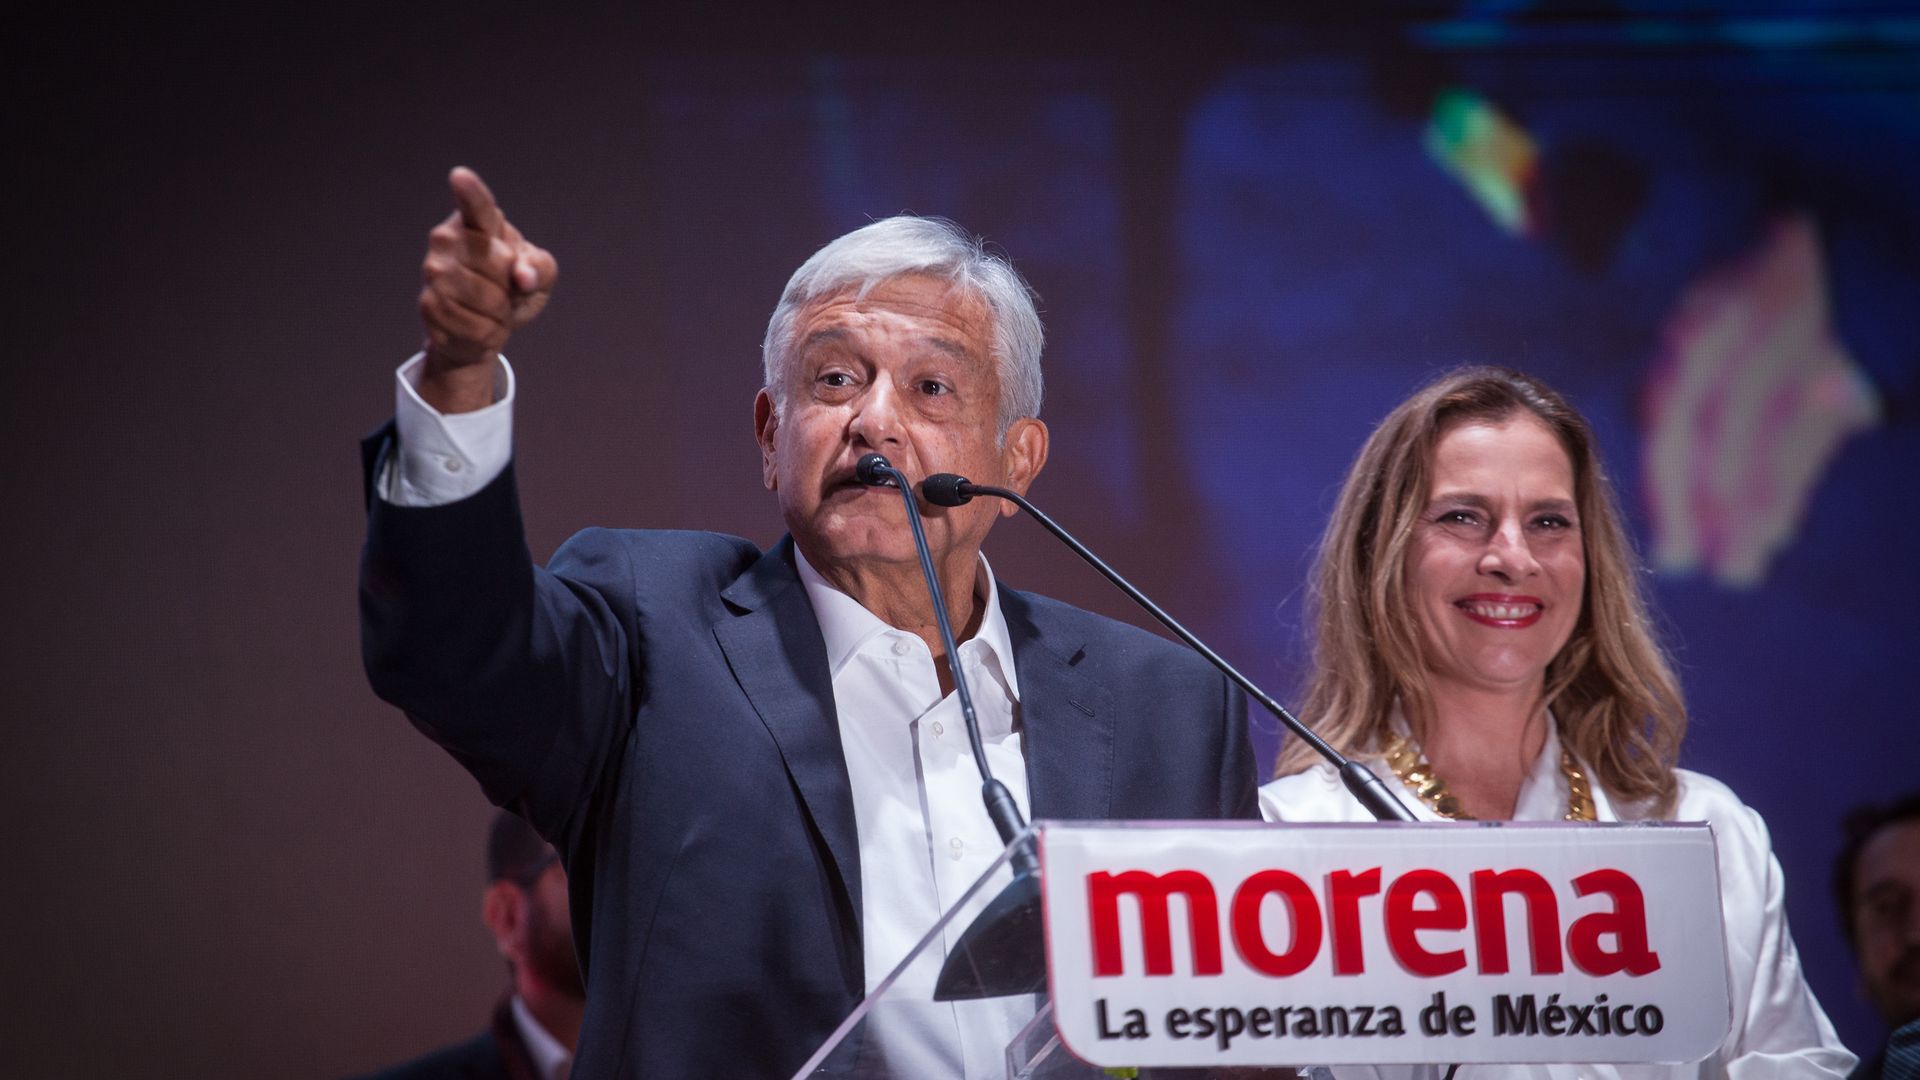 Mexican president Andres Miguel Lopez Obrador after being elected